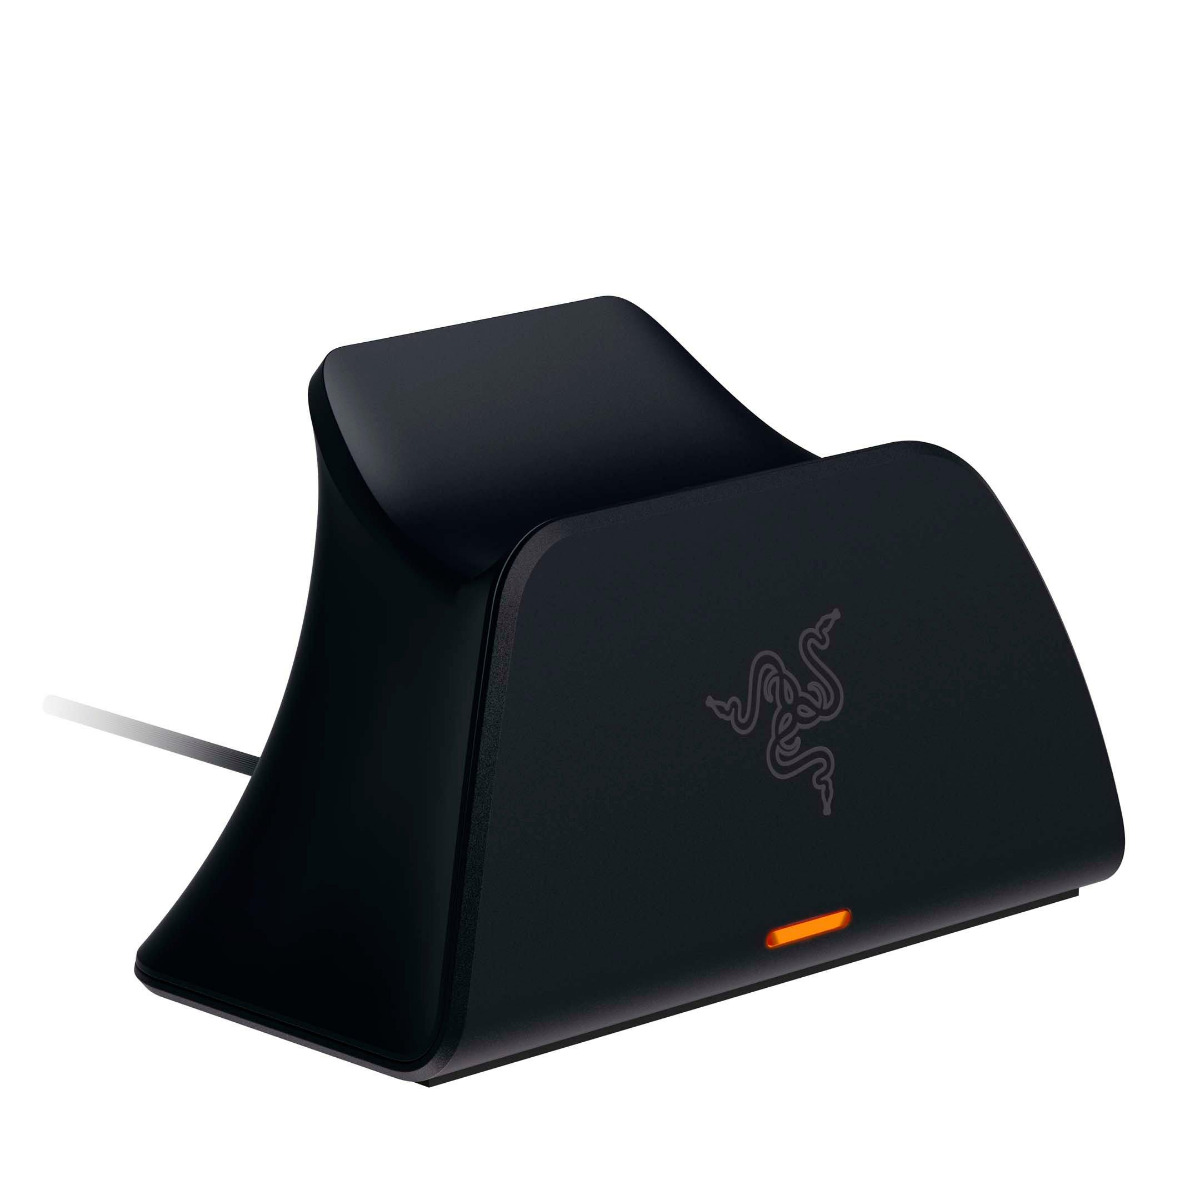 Razer Universal Quick Charging Stand for PlayStation 5 - Midnight Black, RC21-01900200-R3M1